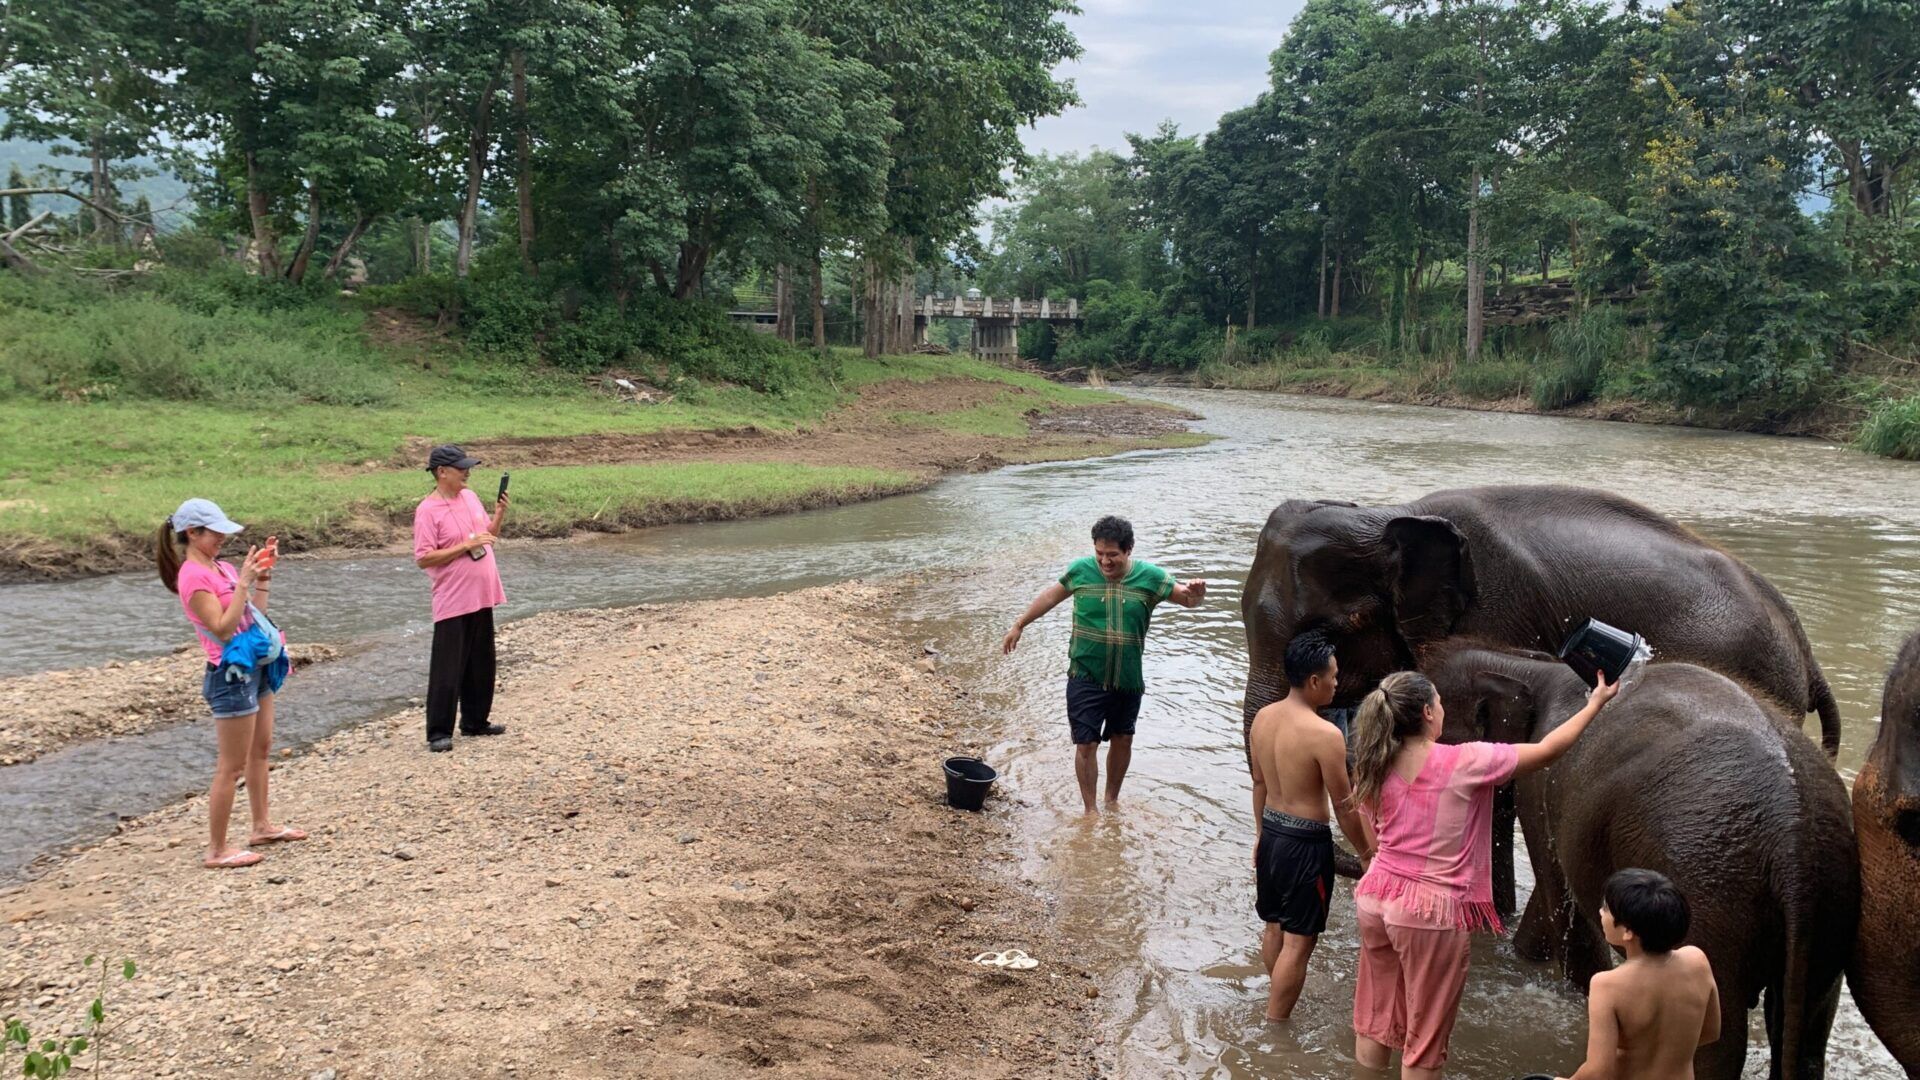 An elephant and a group of people standing in a river.